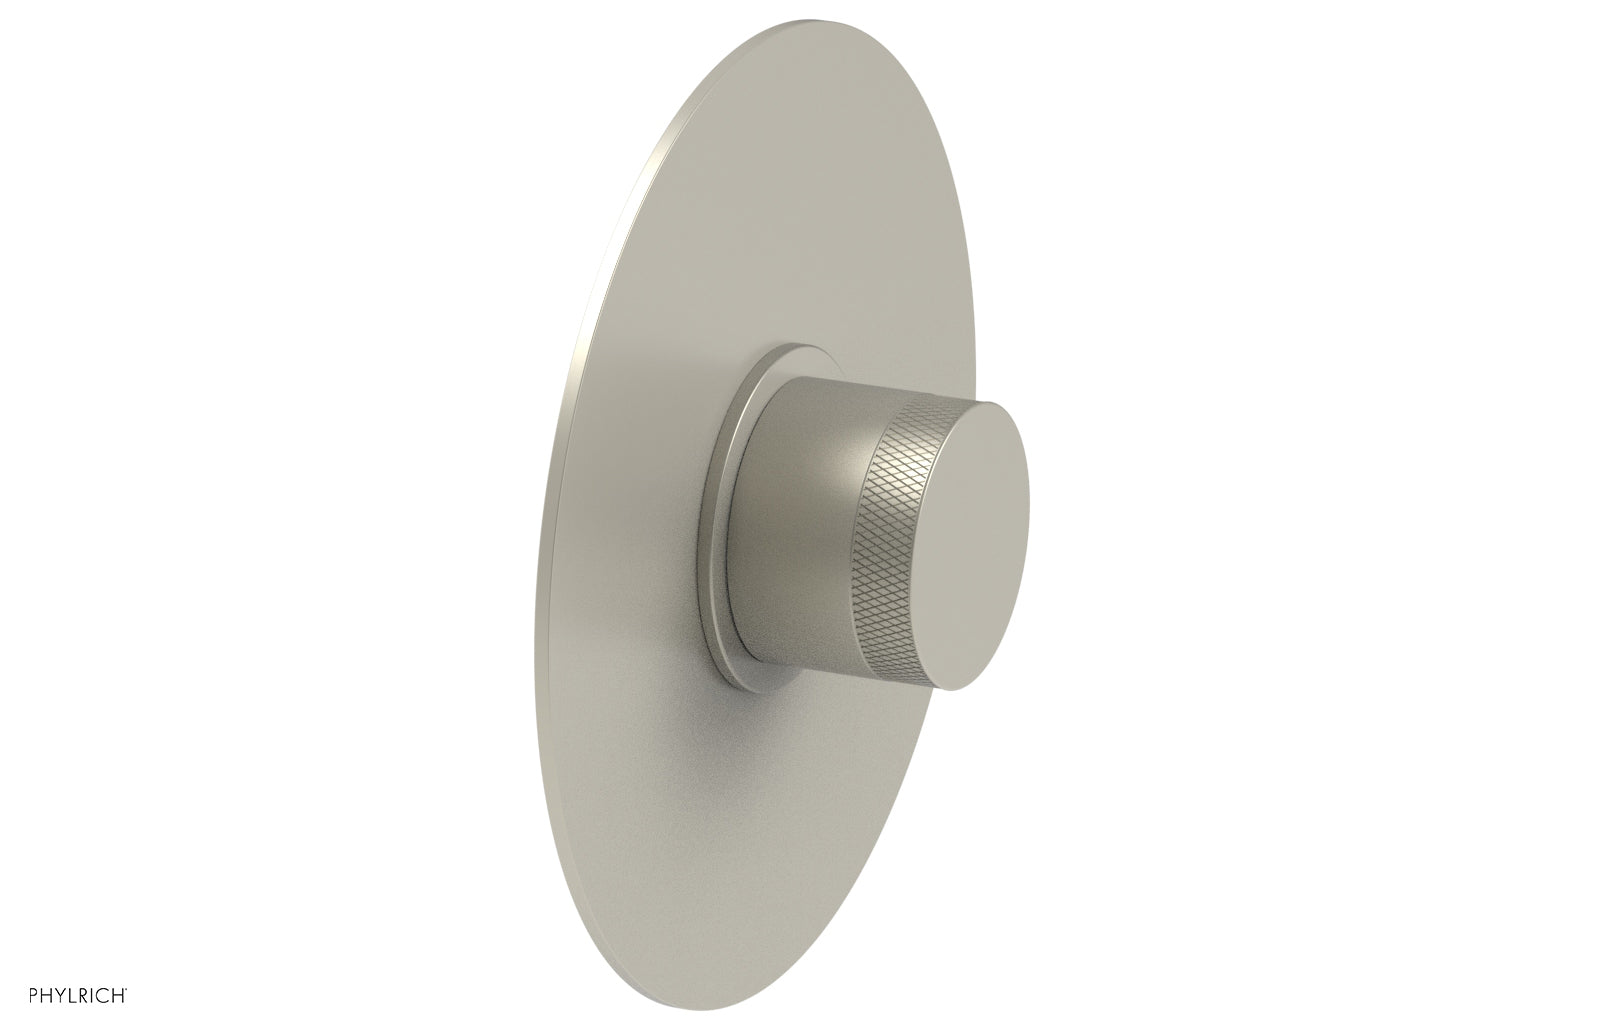 Phylrich BASIC II 3/4" Thermostatic Round Shower Trim, Knurled Handle